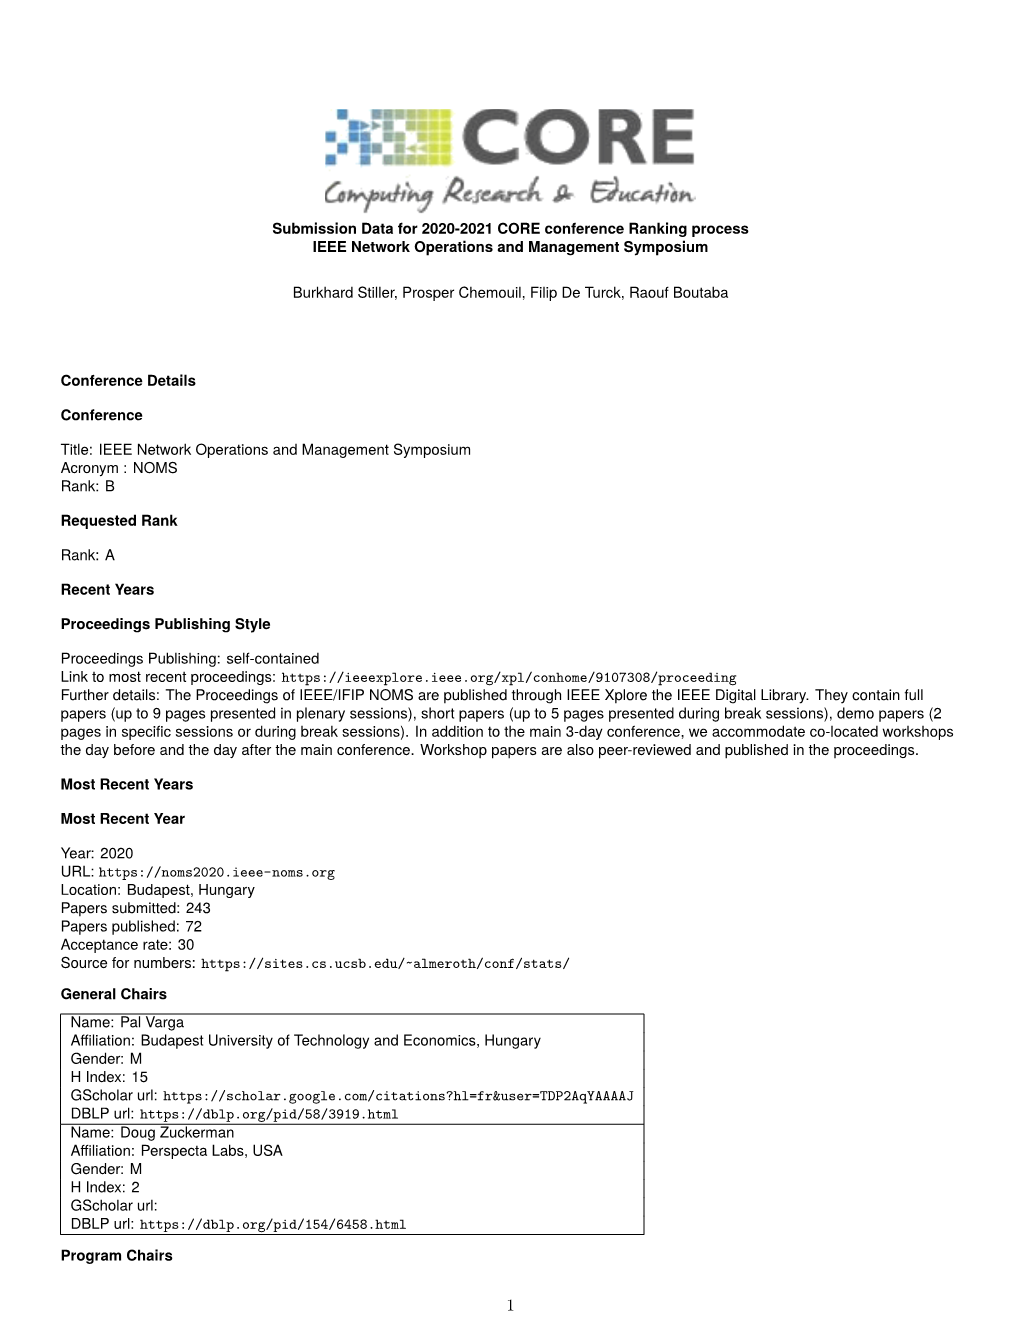 Submission Data for 2020-2021 CORE Conference Ranking Process IEEE Network Operations and Management Symposium